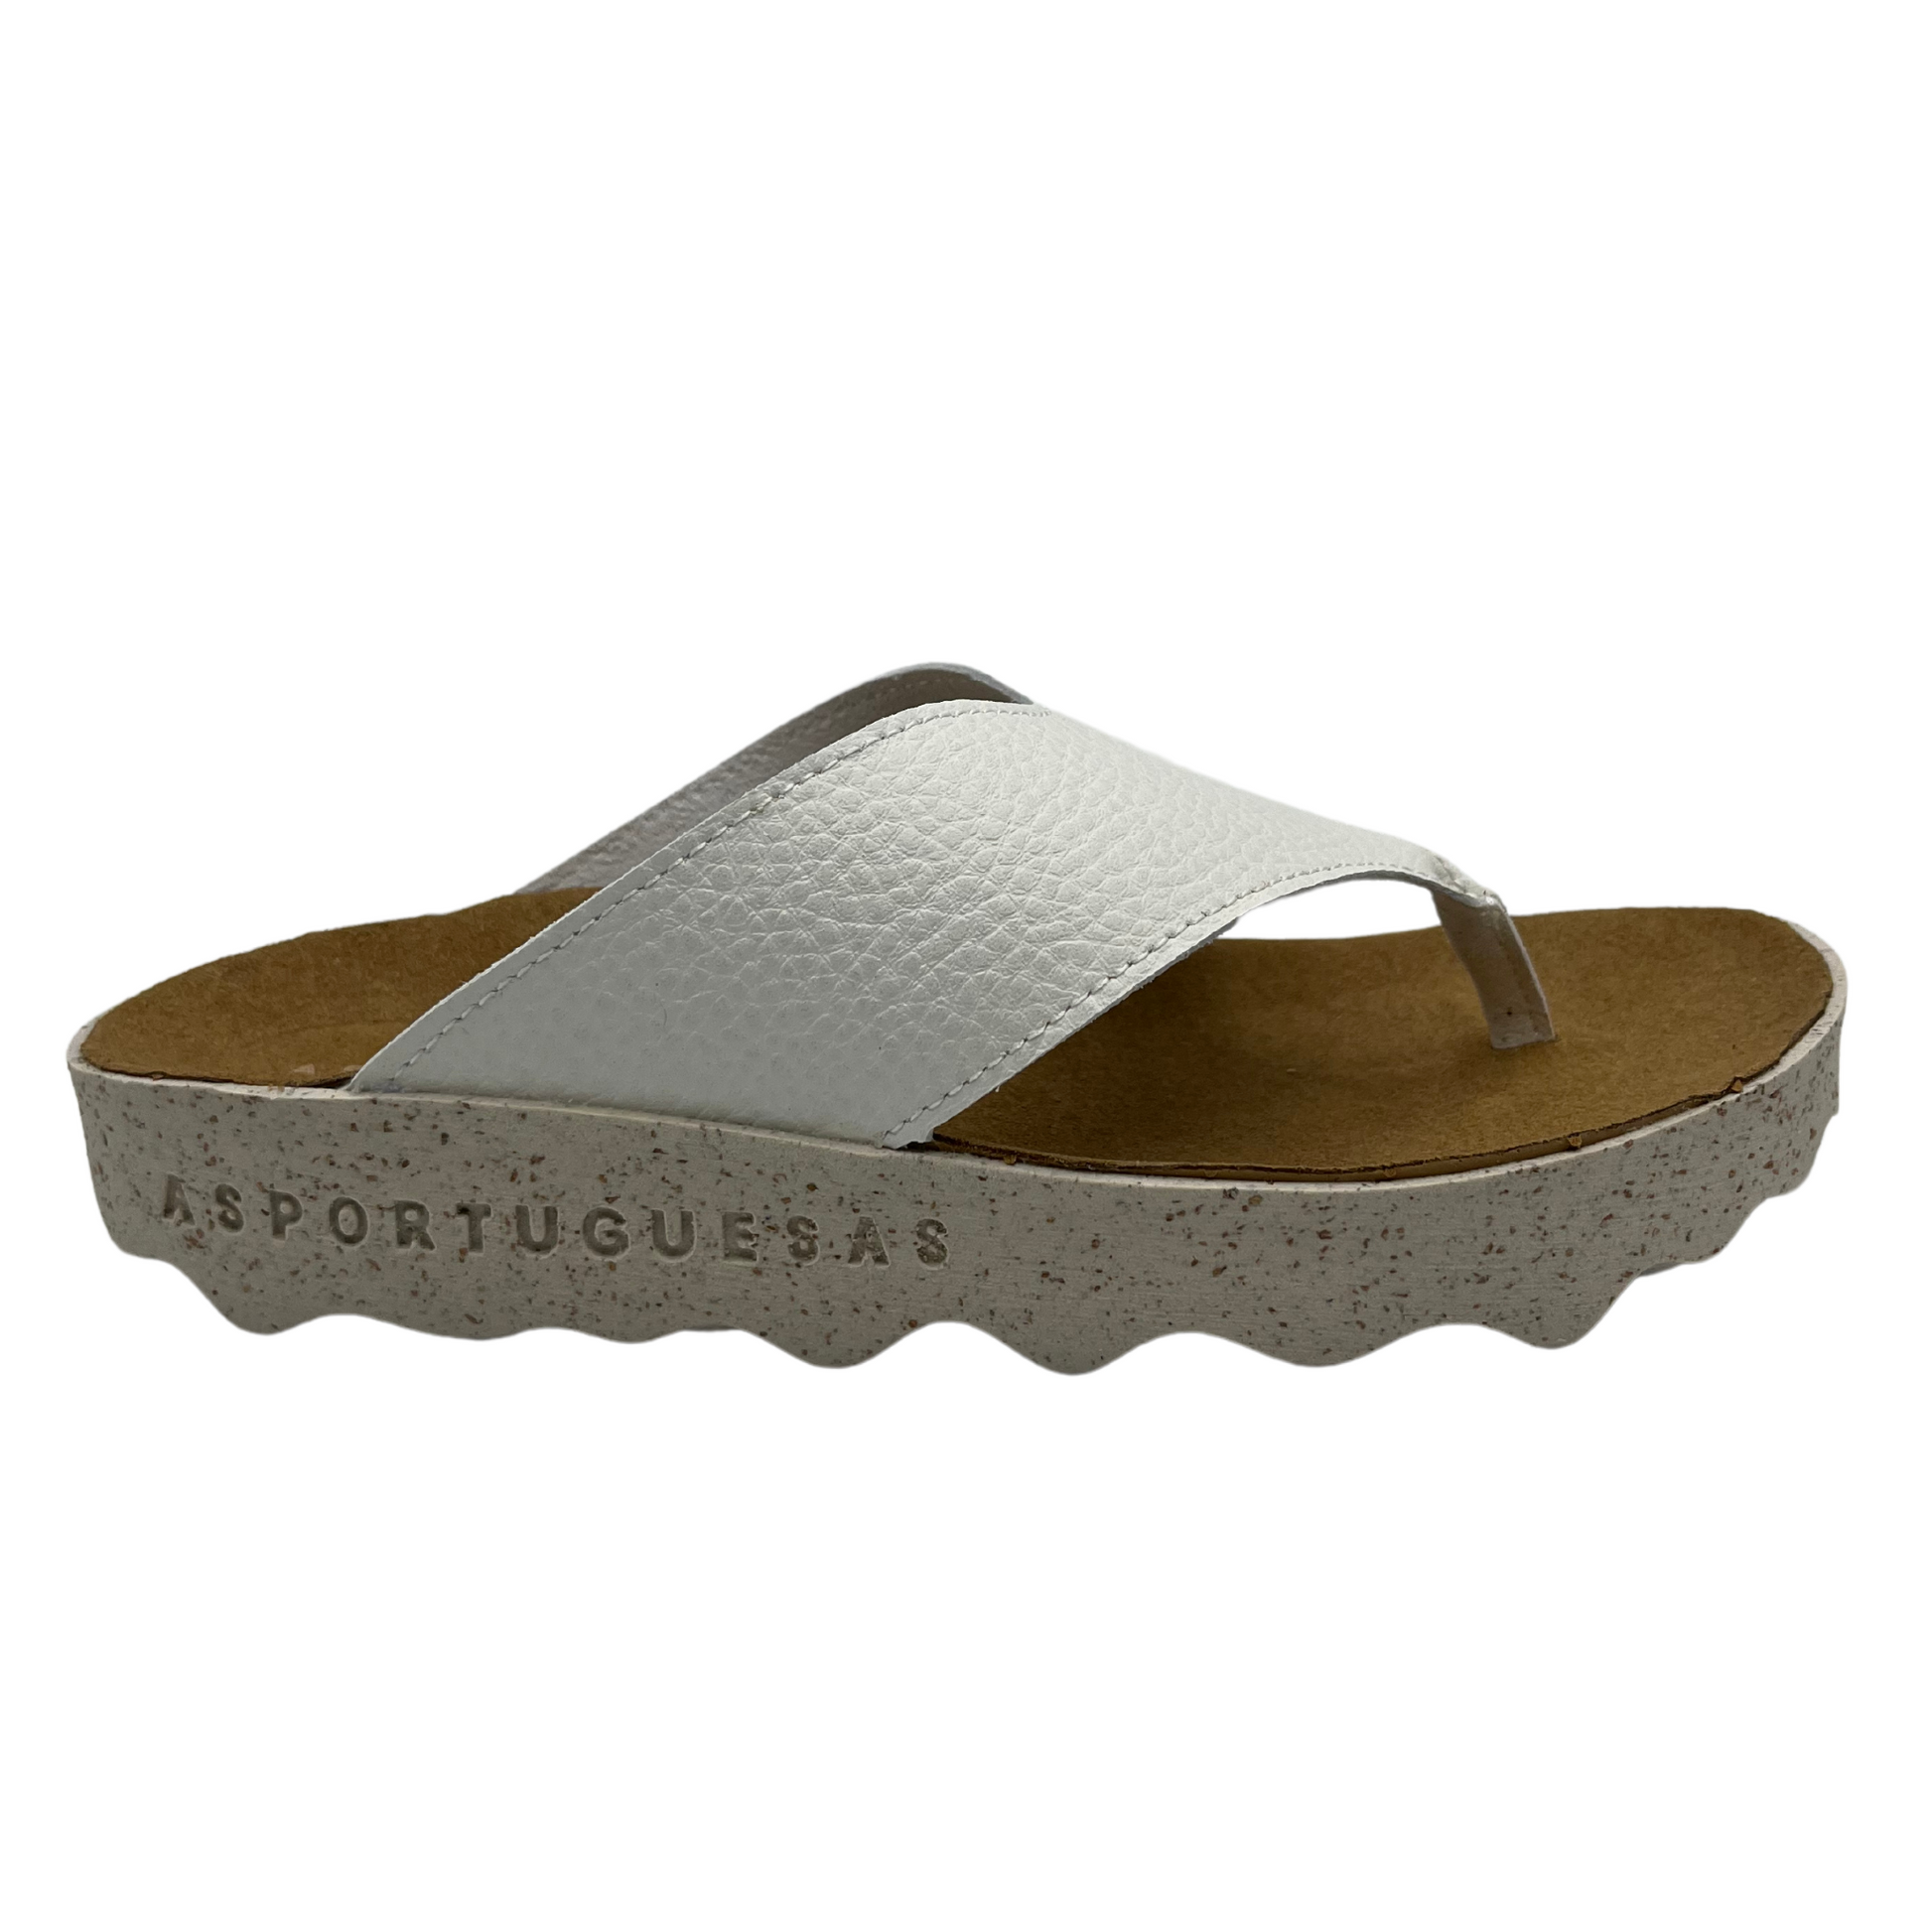 Right facing view of white strapped thong sandal with brown contoured footbed and white speckled outsole